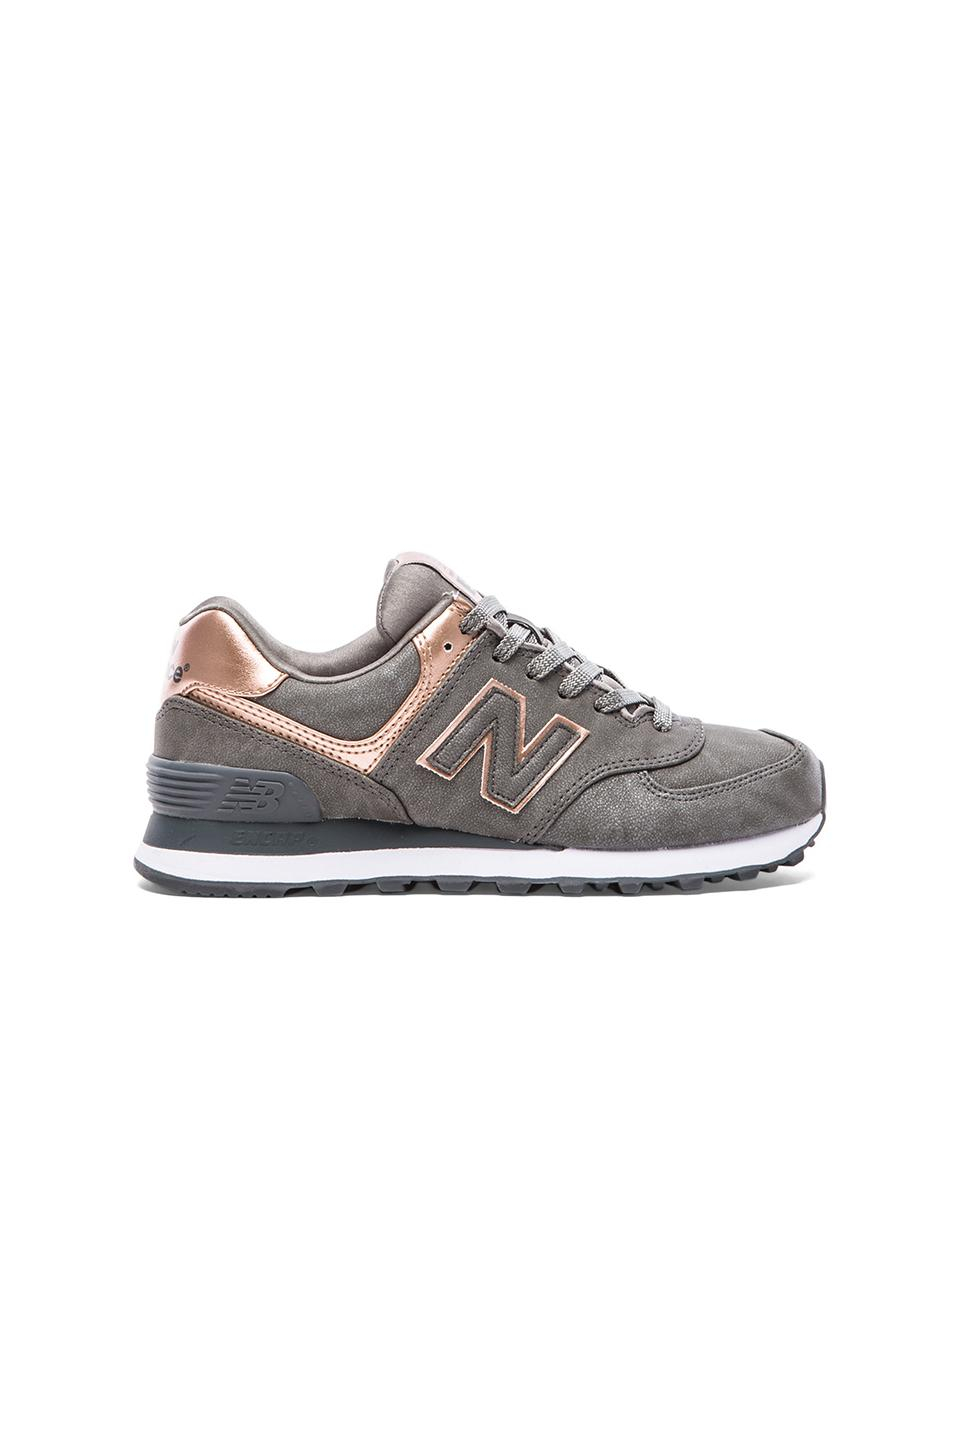 New Balance 574 Precious Metals Collection Sneaker in Silver (Metallic) |  Lyst